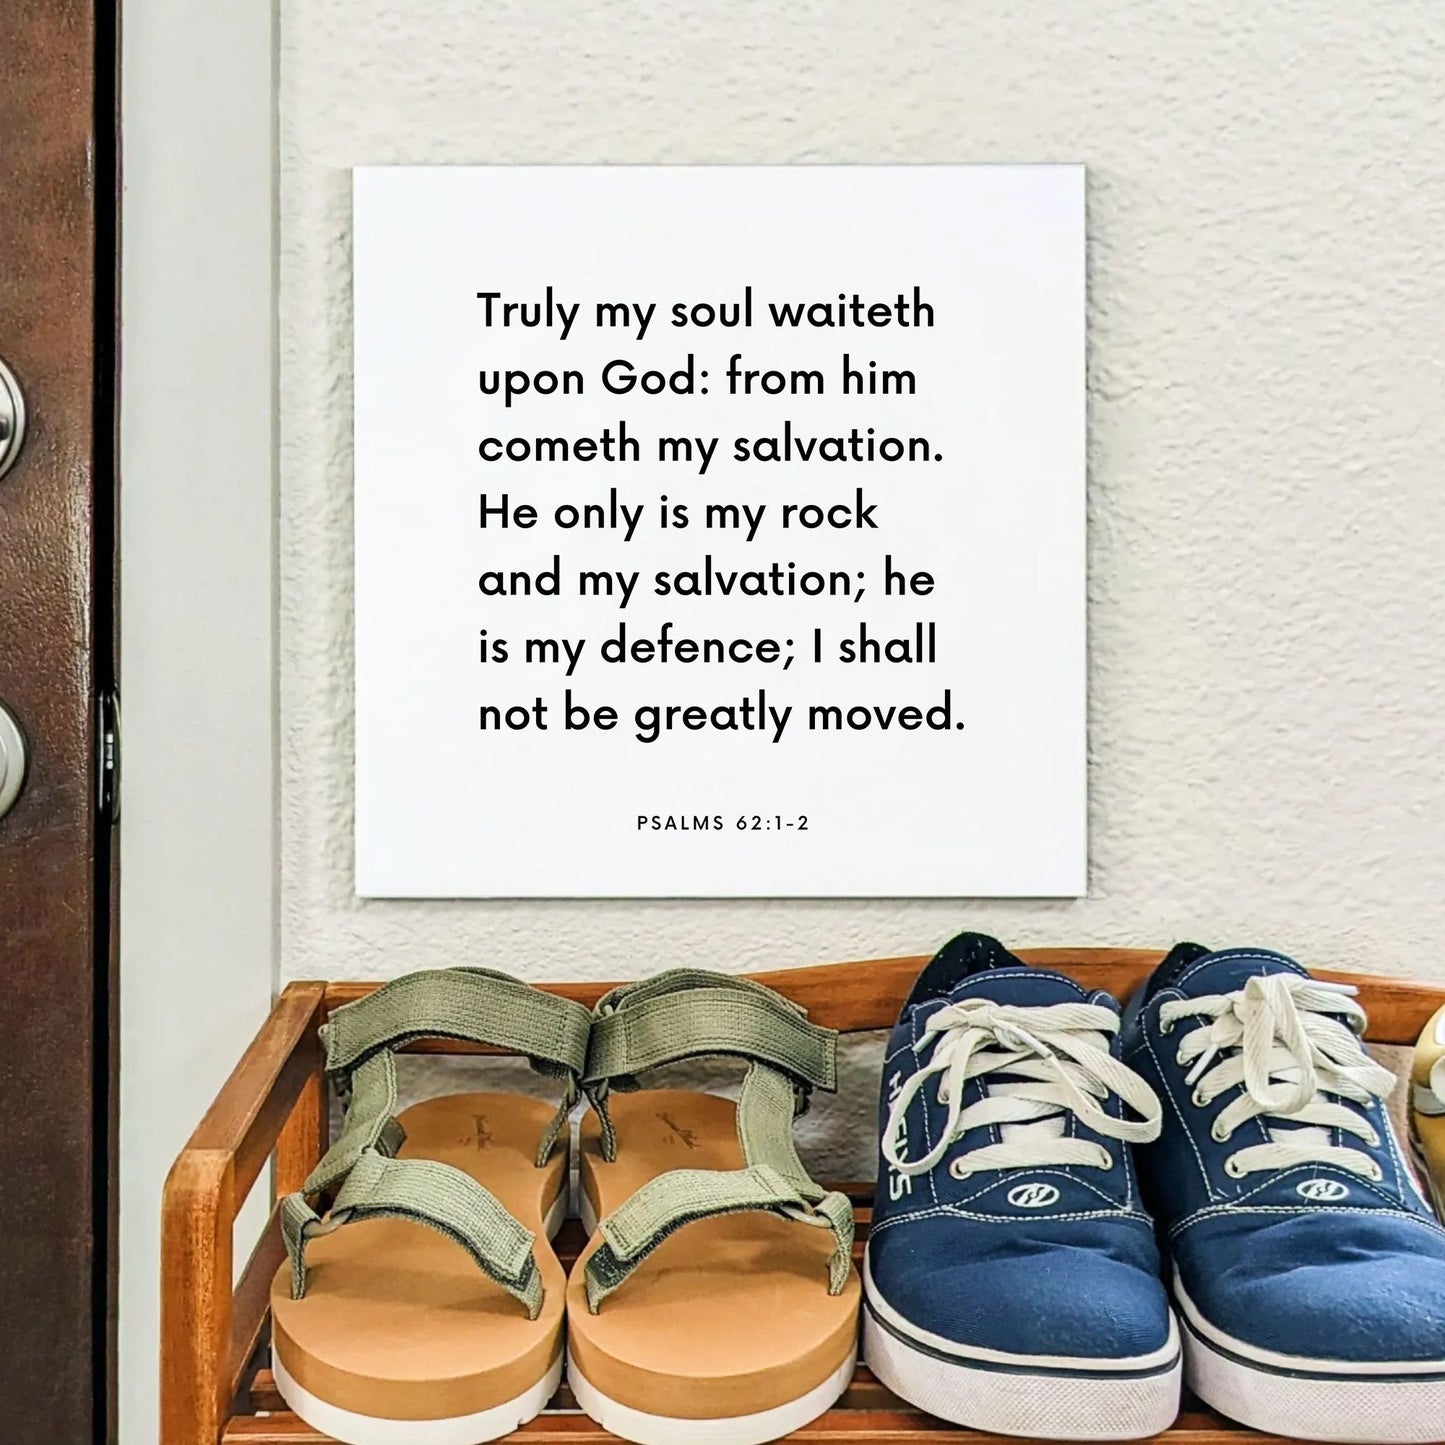 Shoes mouting of the scripture tile for Psalms 62:1-2 - "Truly my soul waiteth upon God"